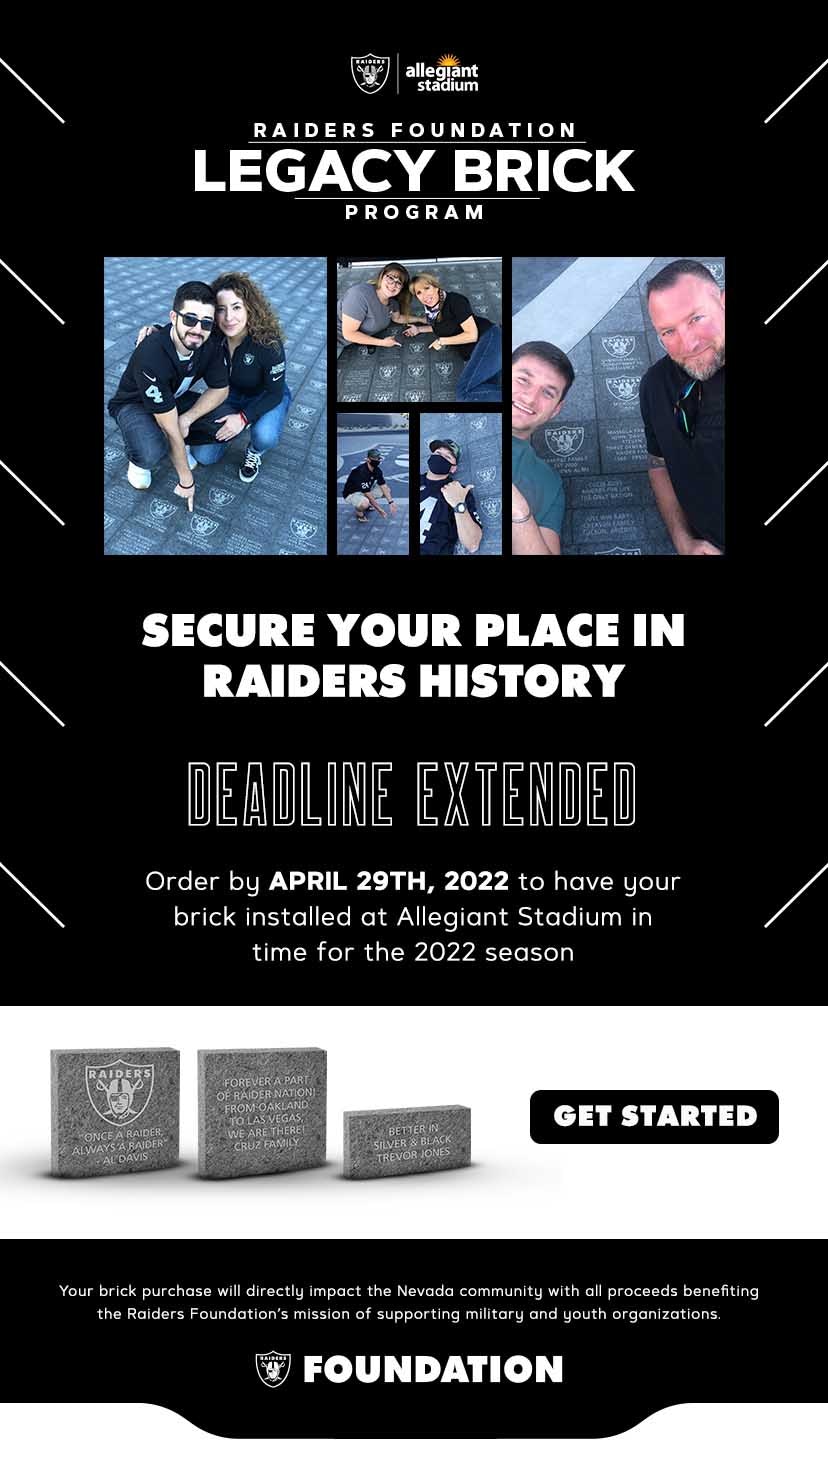 Deadline extended - Purchase your Raiders Brick for the 2022 season before April 29. 